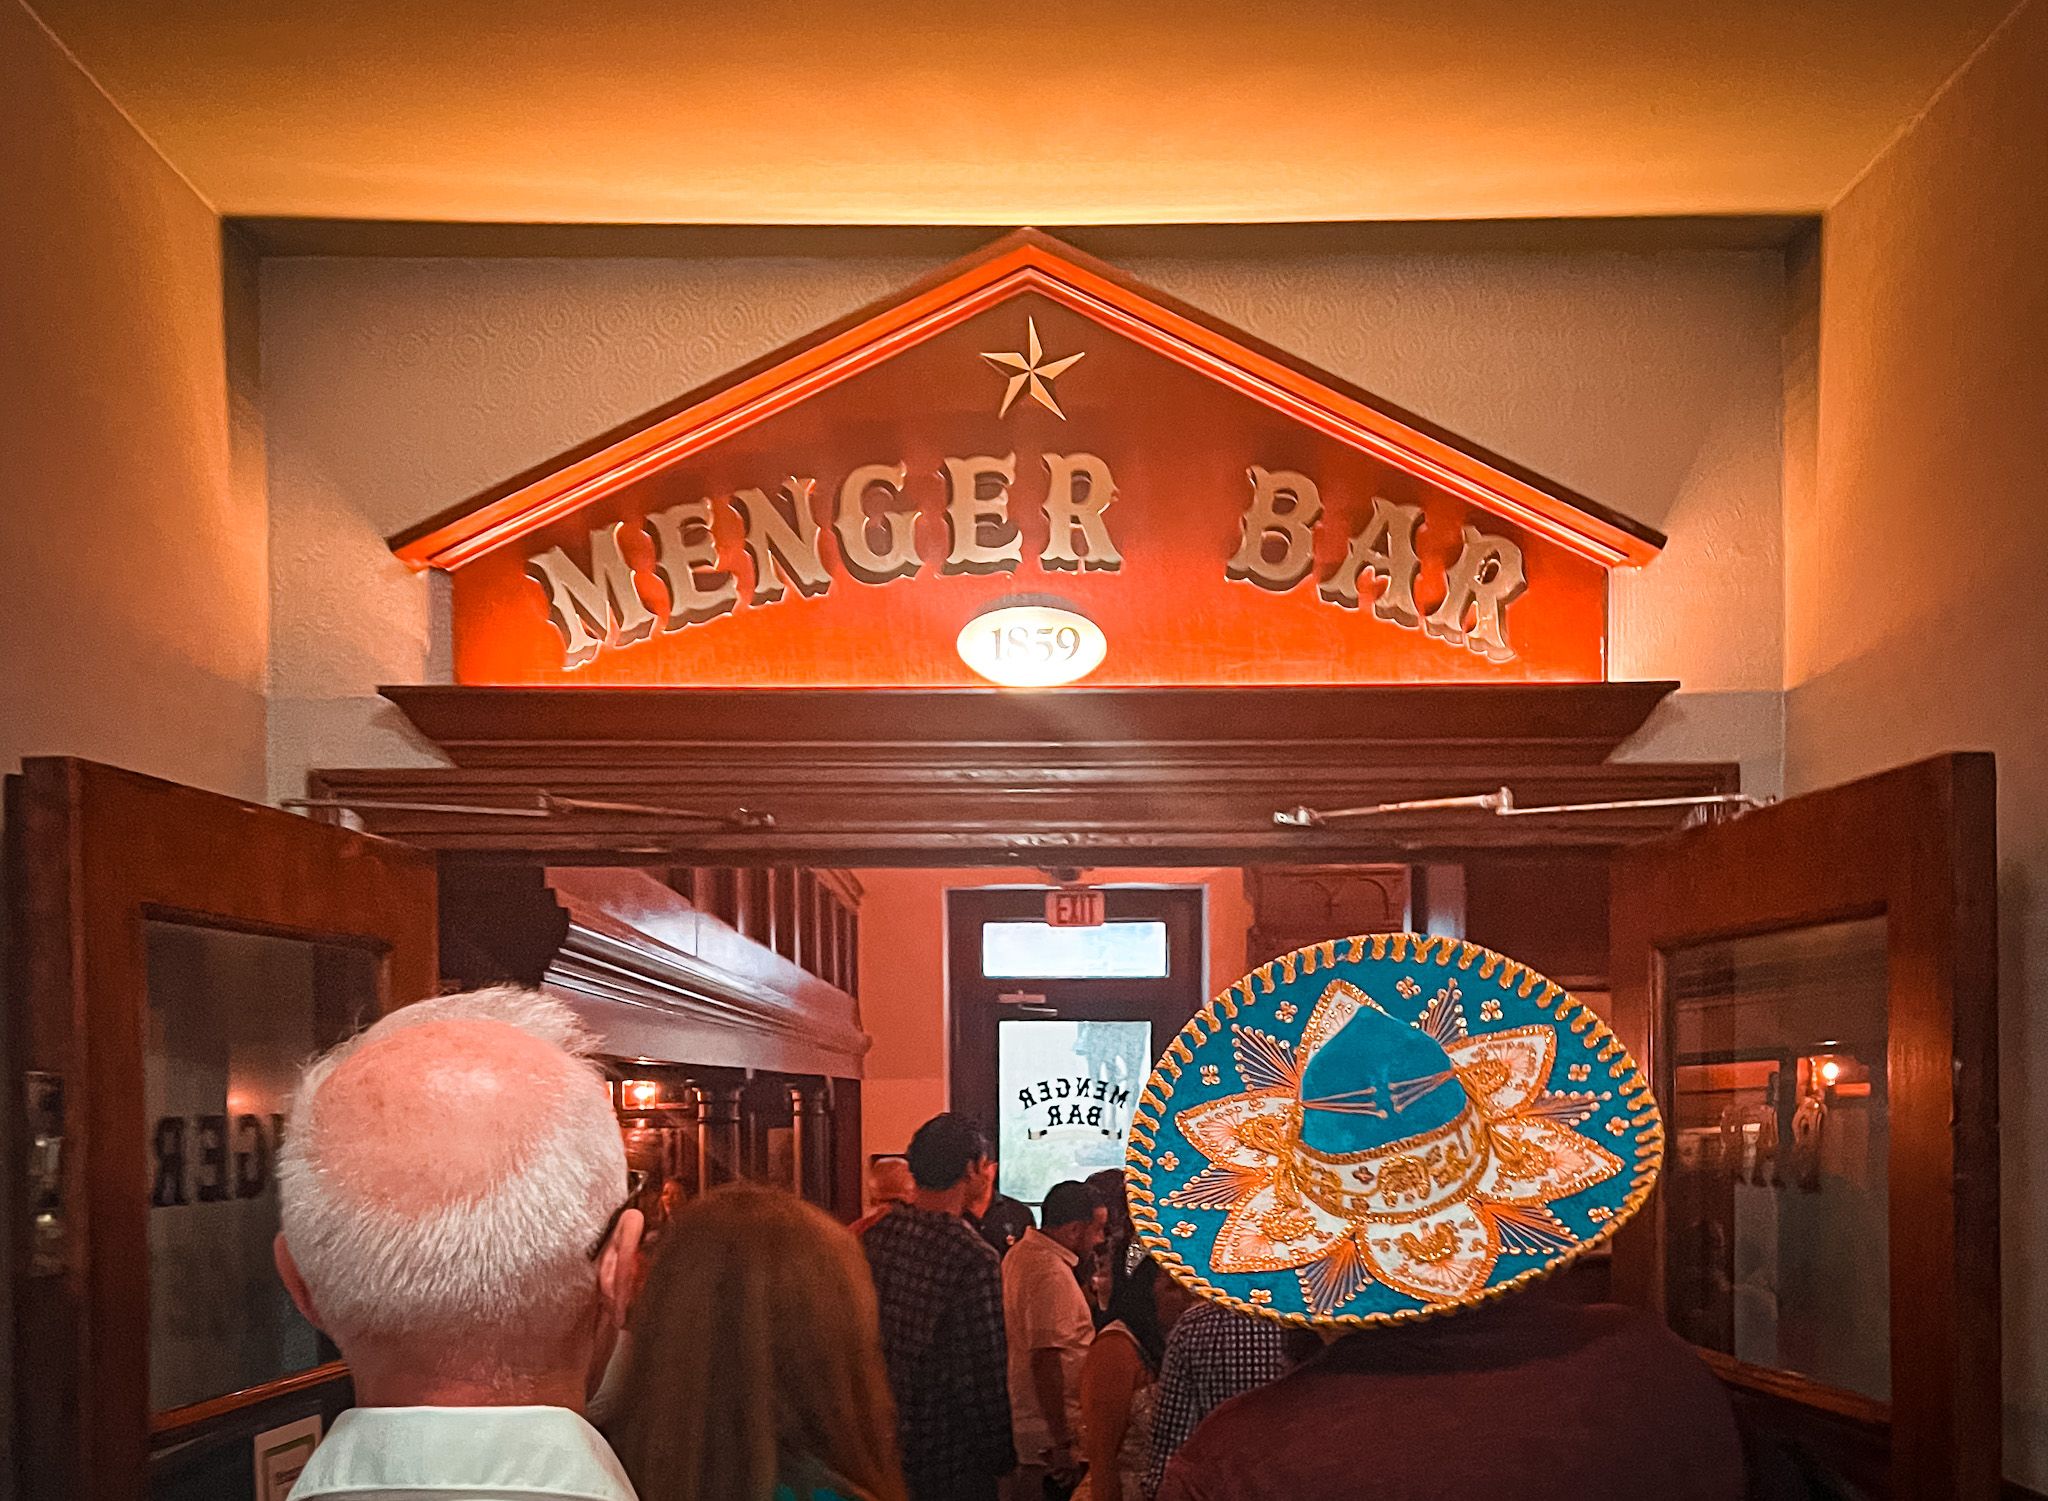 A group of people pass through a door with the words "Menger Bar" overhead. 